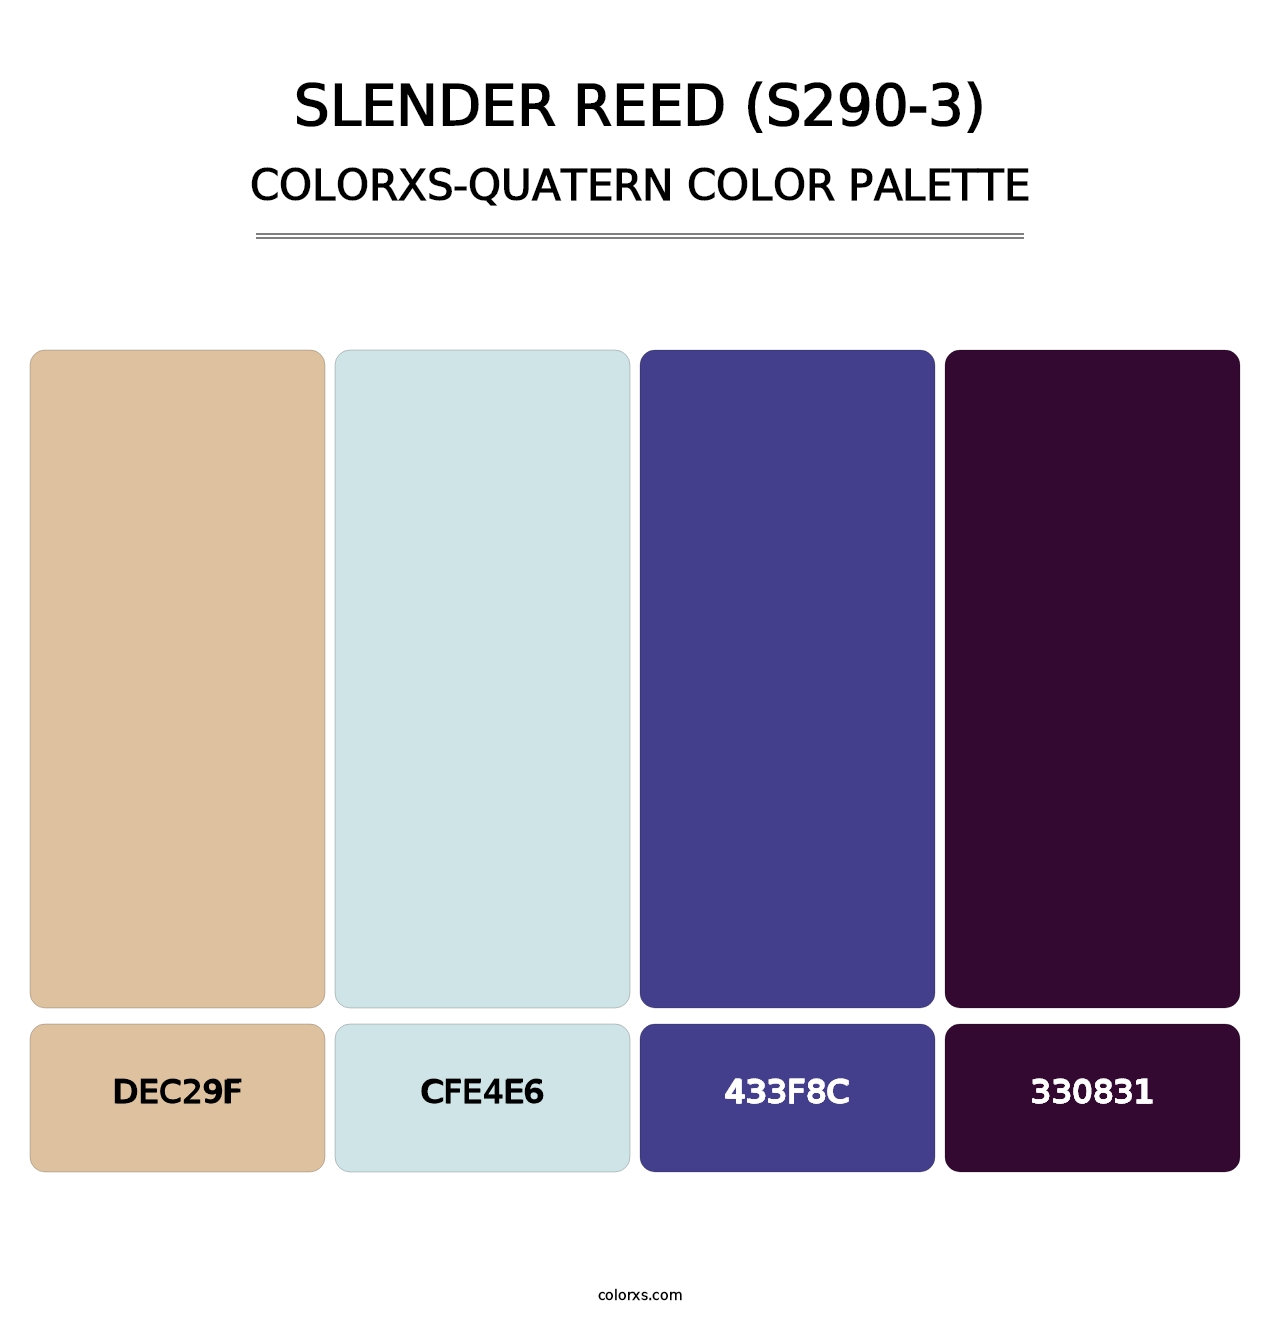 Slender Reed (S290-3) - Colorxs Quatern Palette